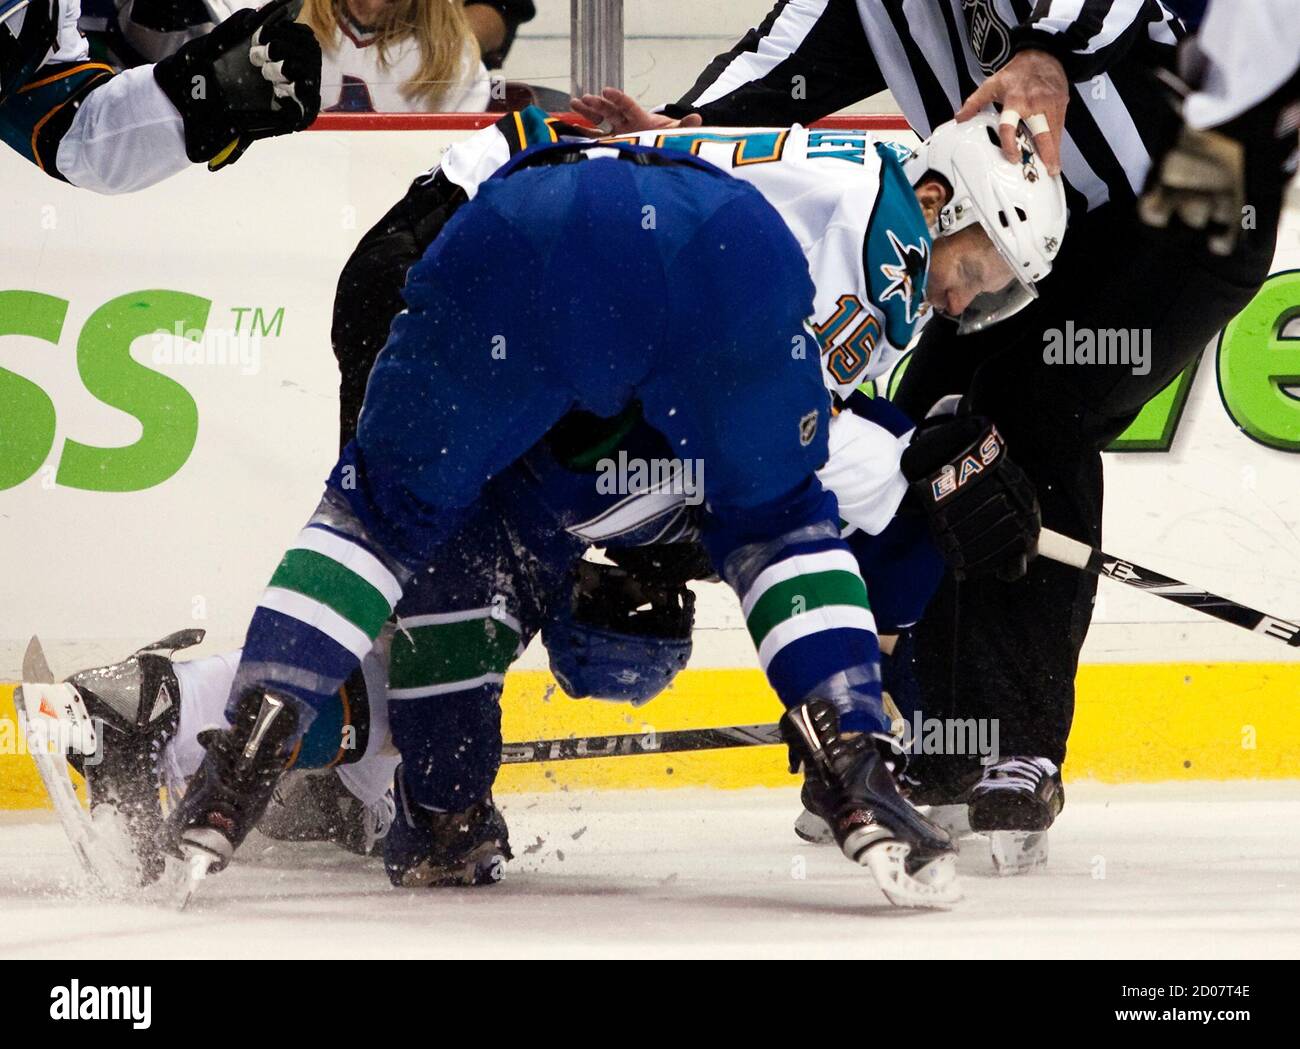 Vancouver Canucks Raffi Torres (blue) is roughed up by San Jose Sharks Dany Heatley during the first period of their NHL hockey game in Vancouver, British Columbia January 20, 2011.  REUTERS/Ben Nelms  (CANADA - Tags: SPORT ICE HOCKEY) Stock Photo